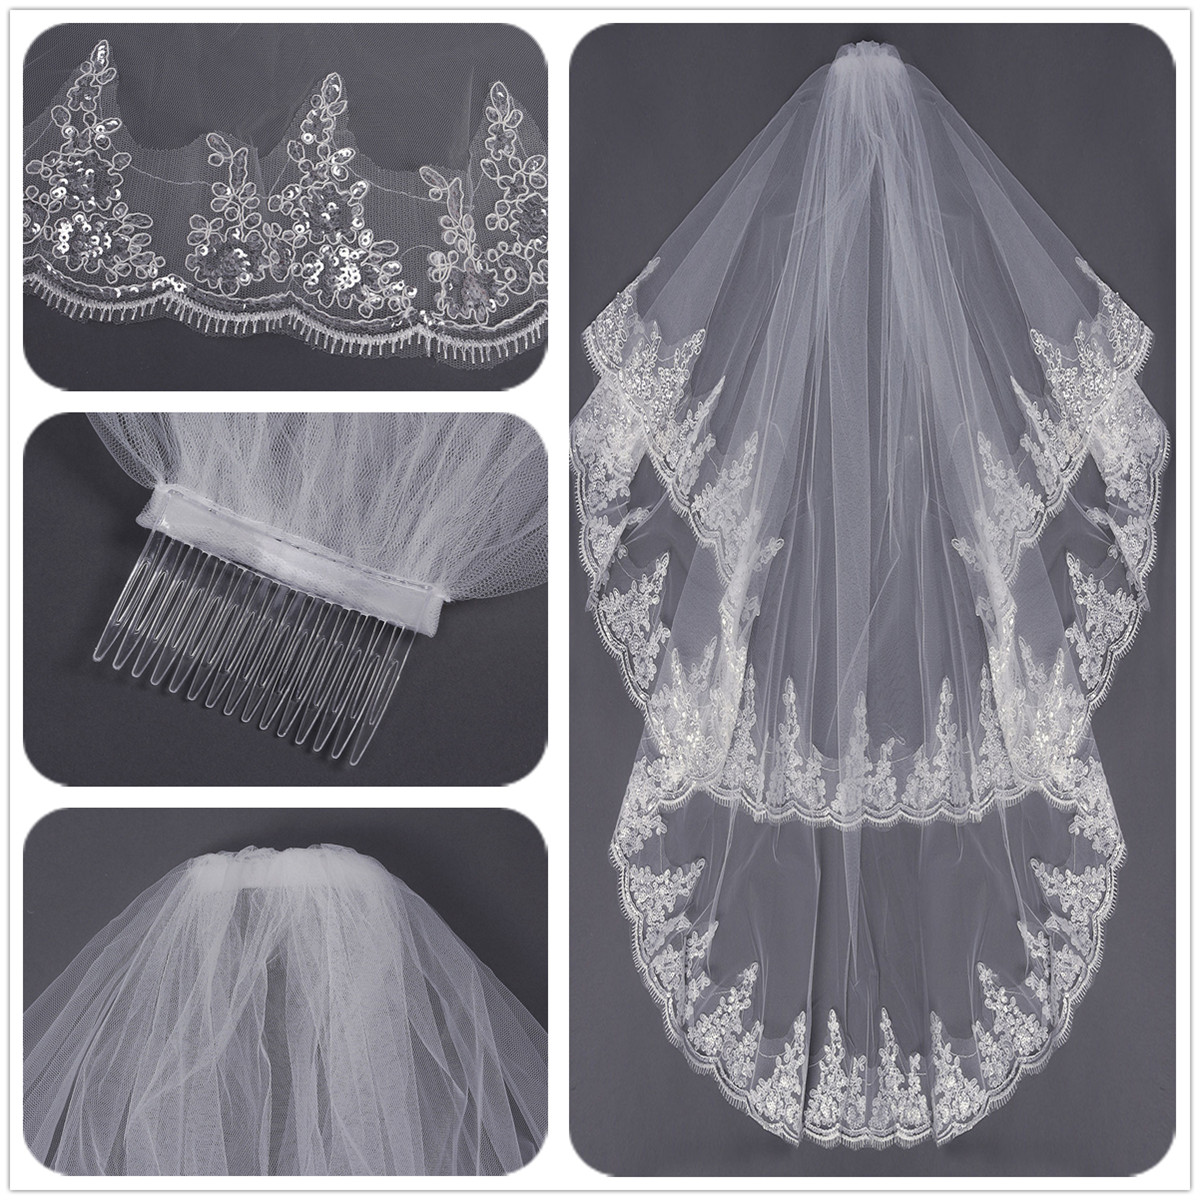 2-Layers-Embroidery-Lace-Pearl-Beaded-Edge-Bridal-Wedding-Elbow-Veil-With-Comb-1018671